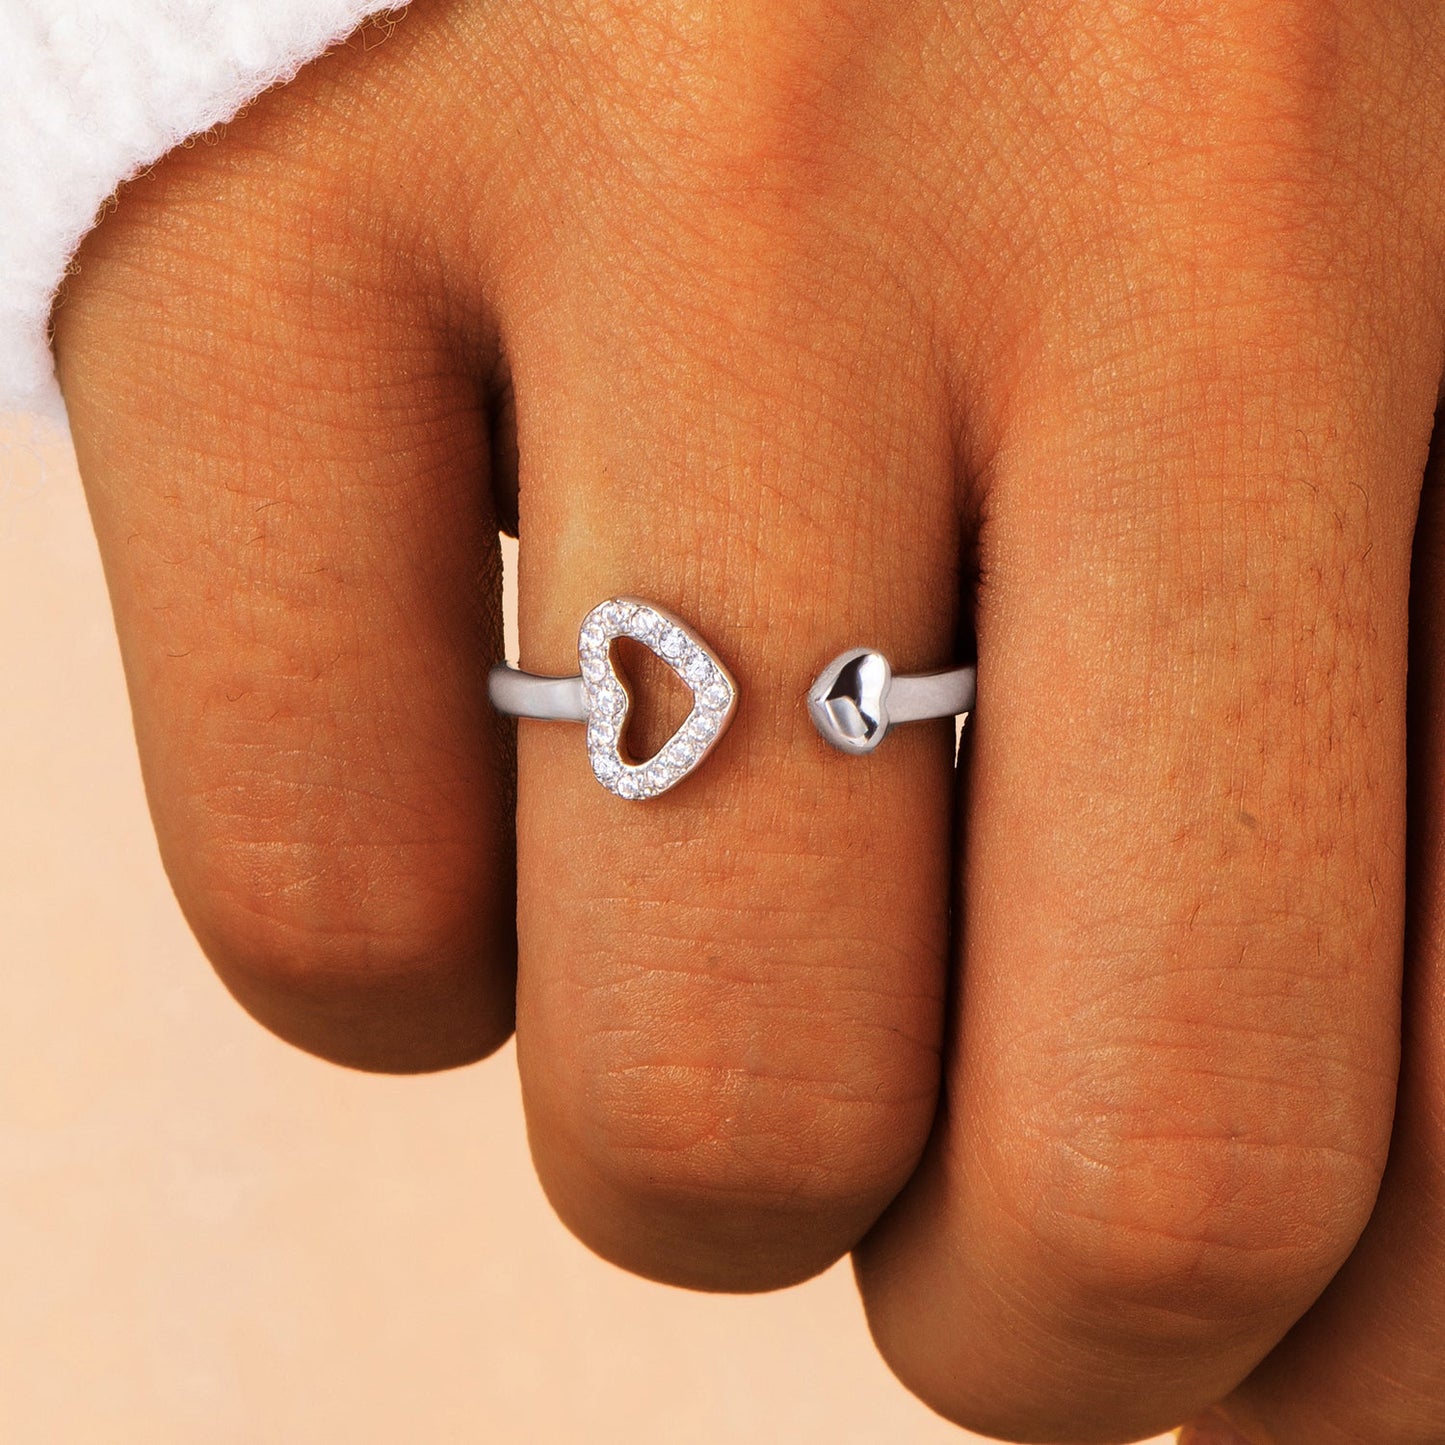 "The love between a grandmother and granddaughter is forever." Double Heart Ring